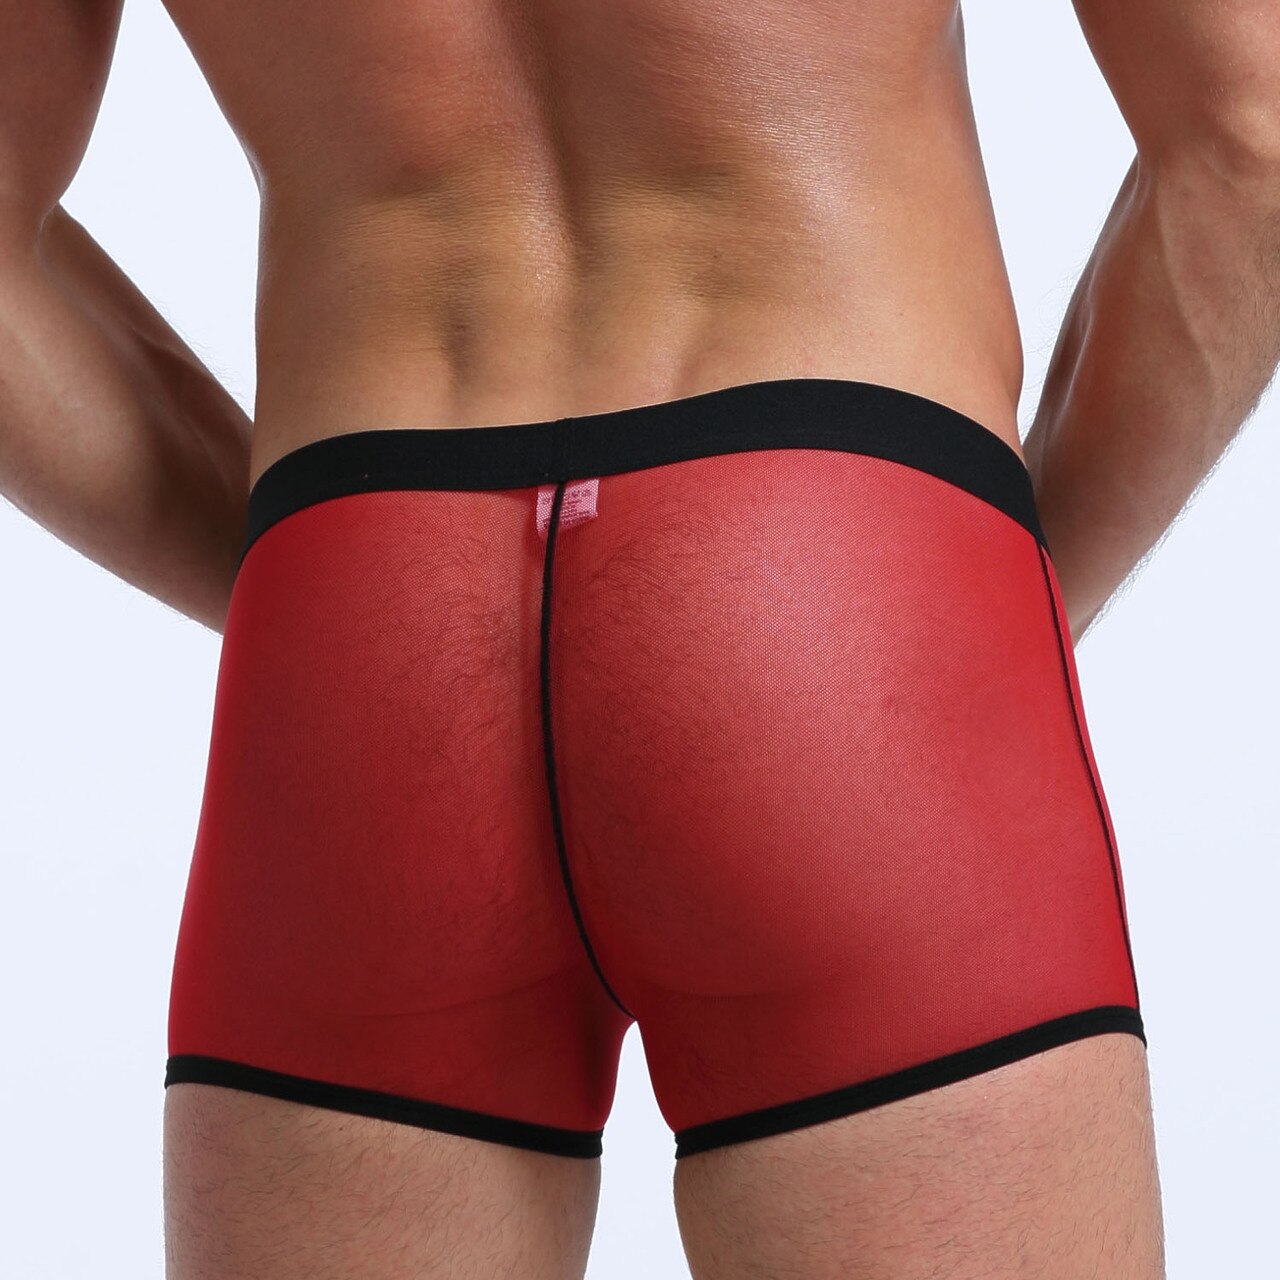 SALE - Mens Stretch Mesh Sheer Boxer Briefs with Pouch Front Red